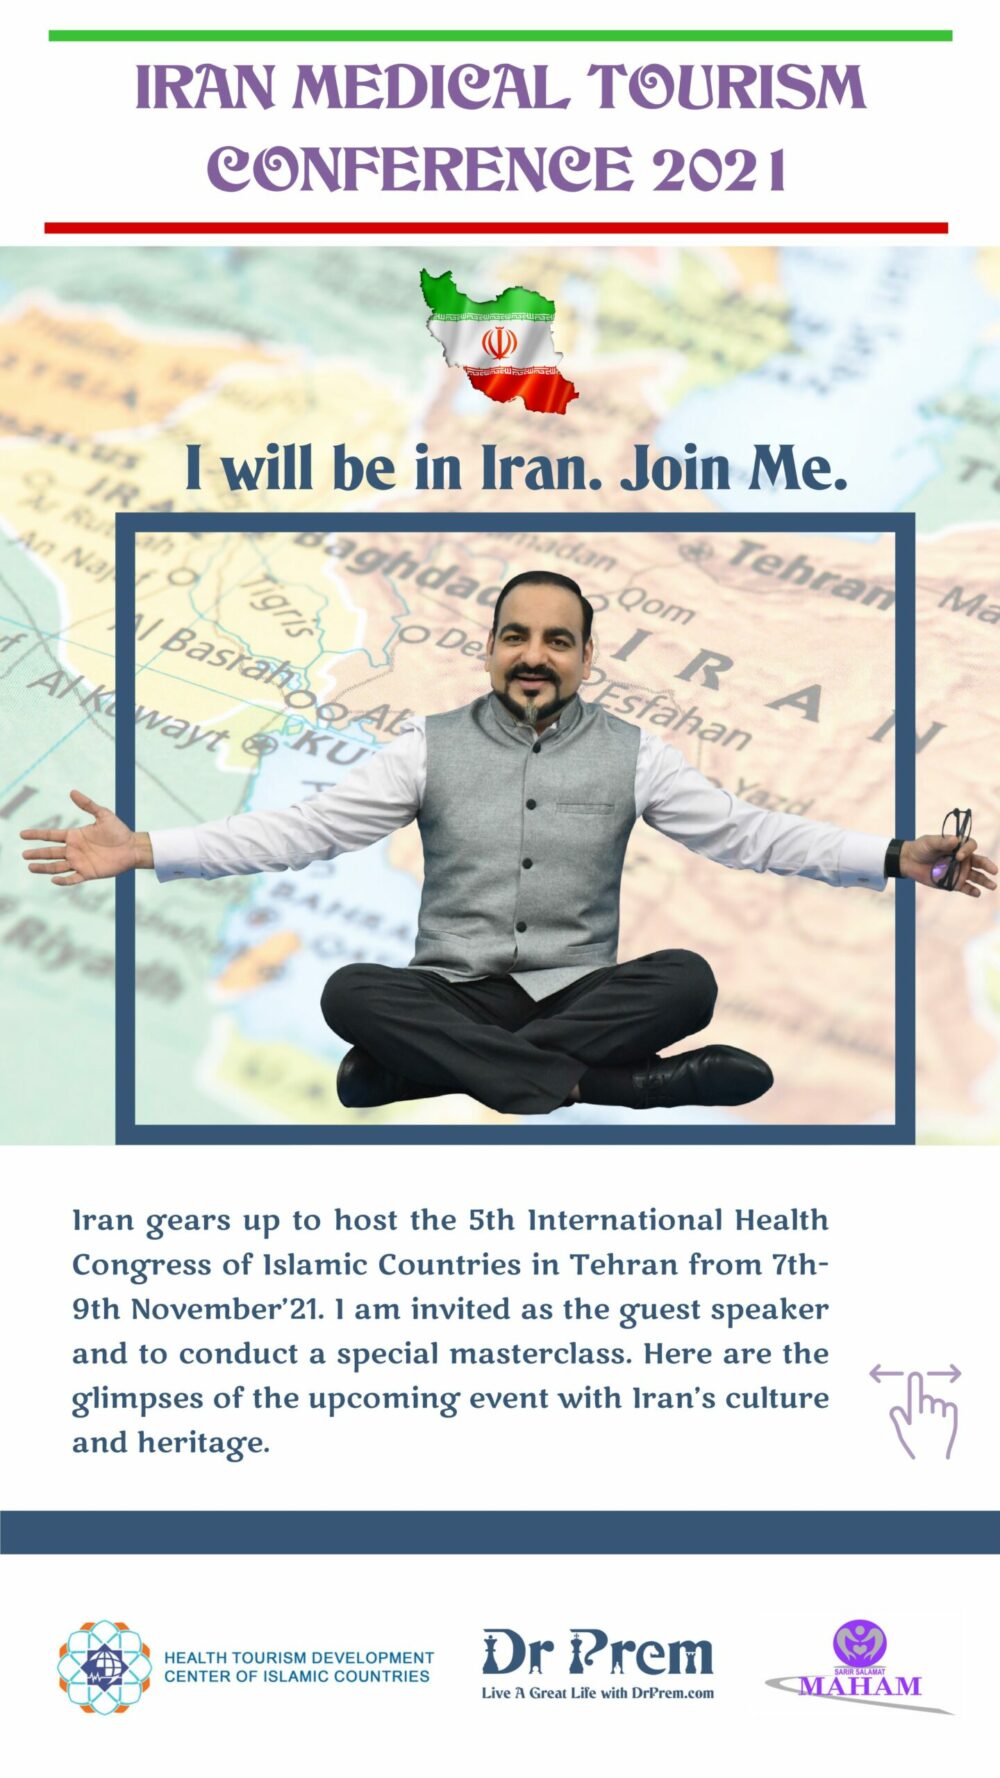 Iran Medical Tourism Conference 2021